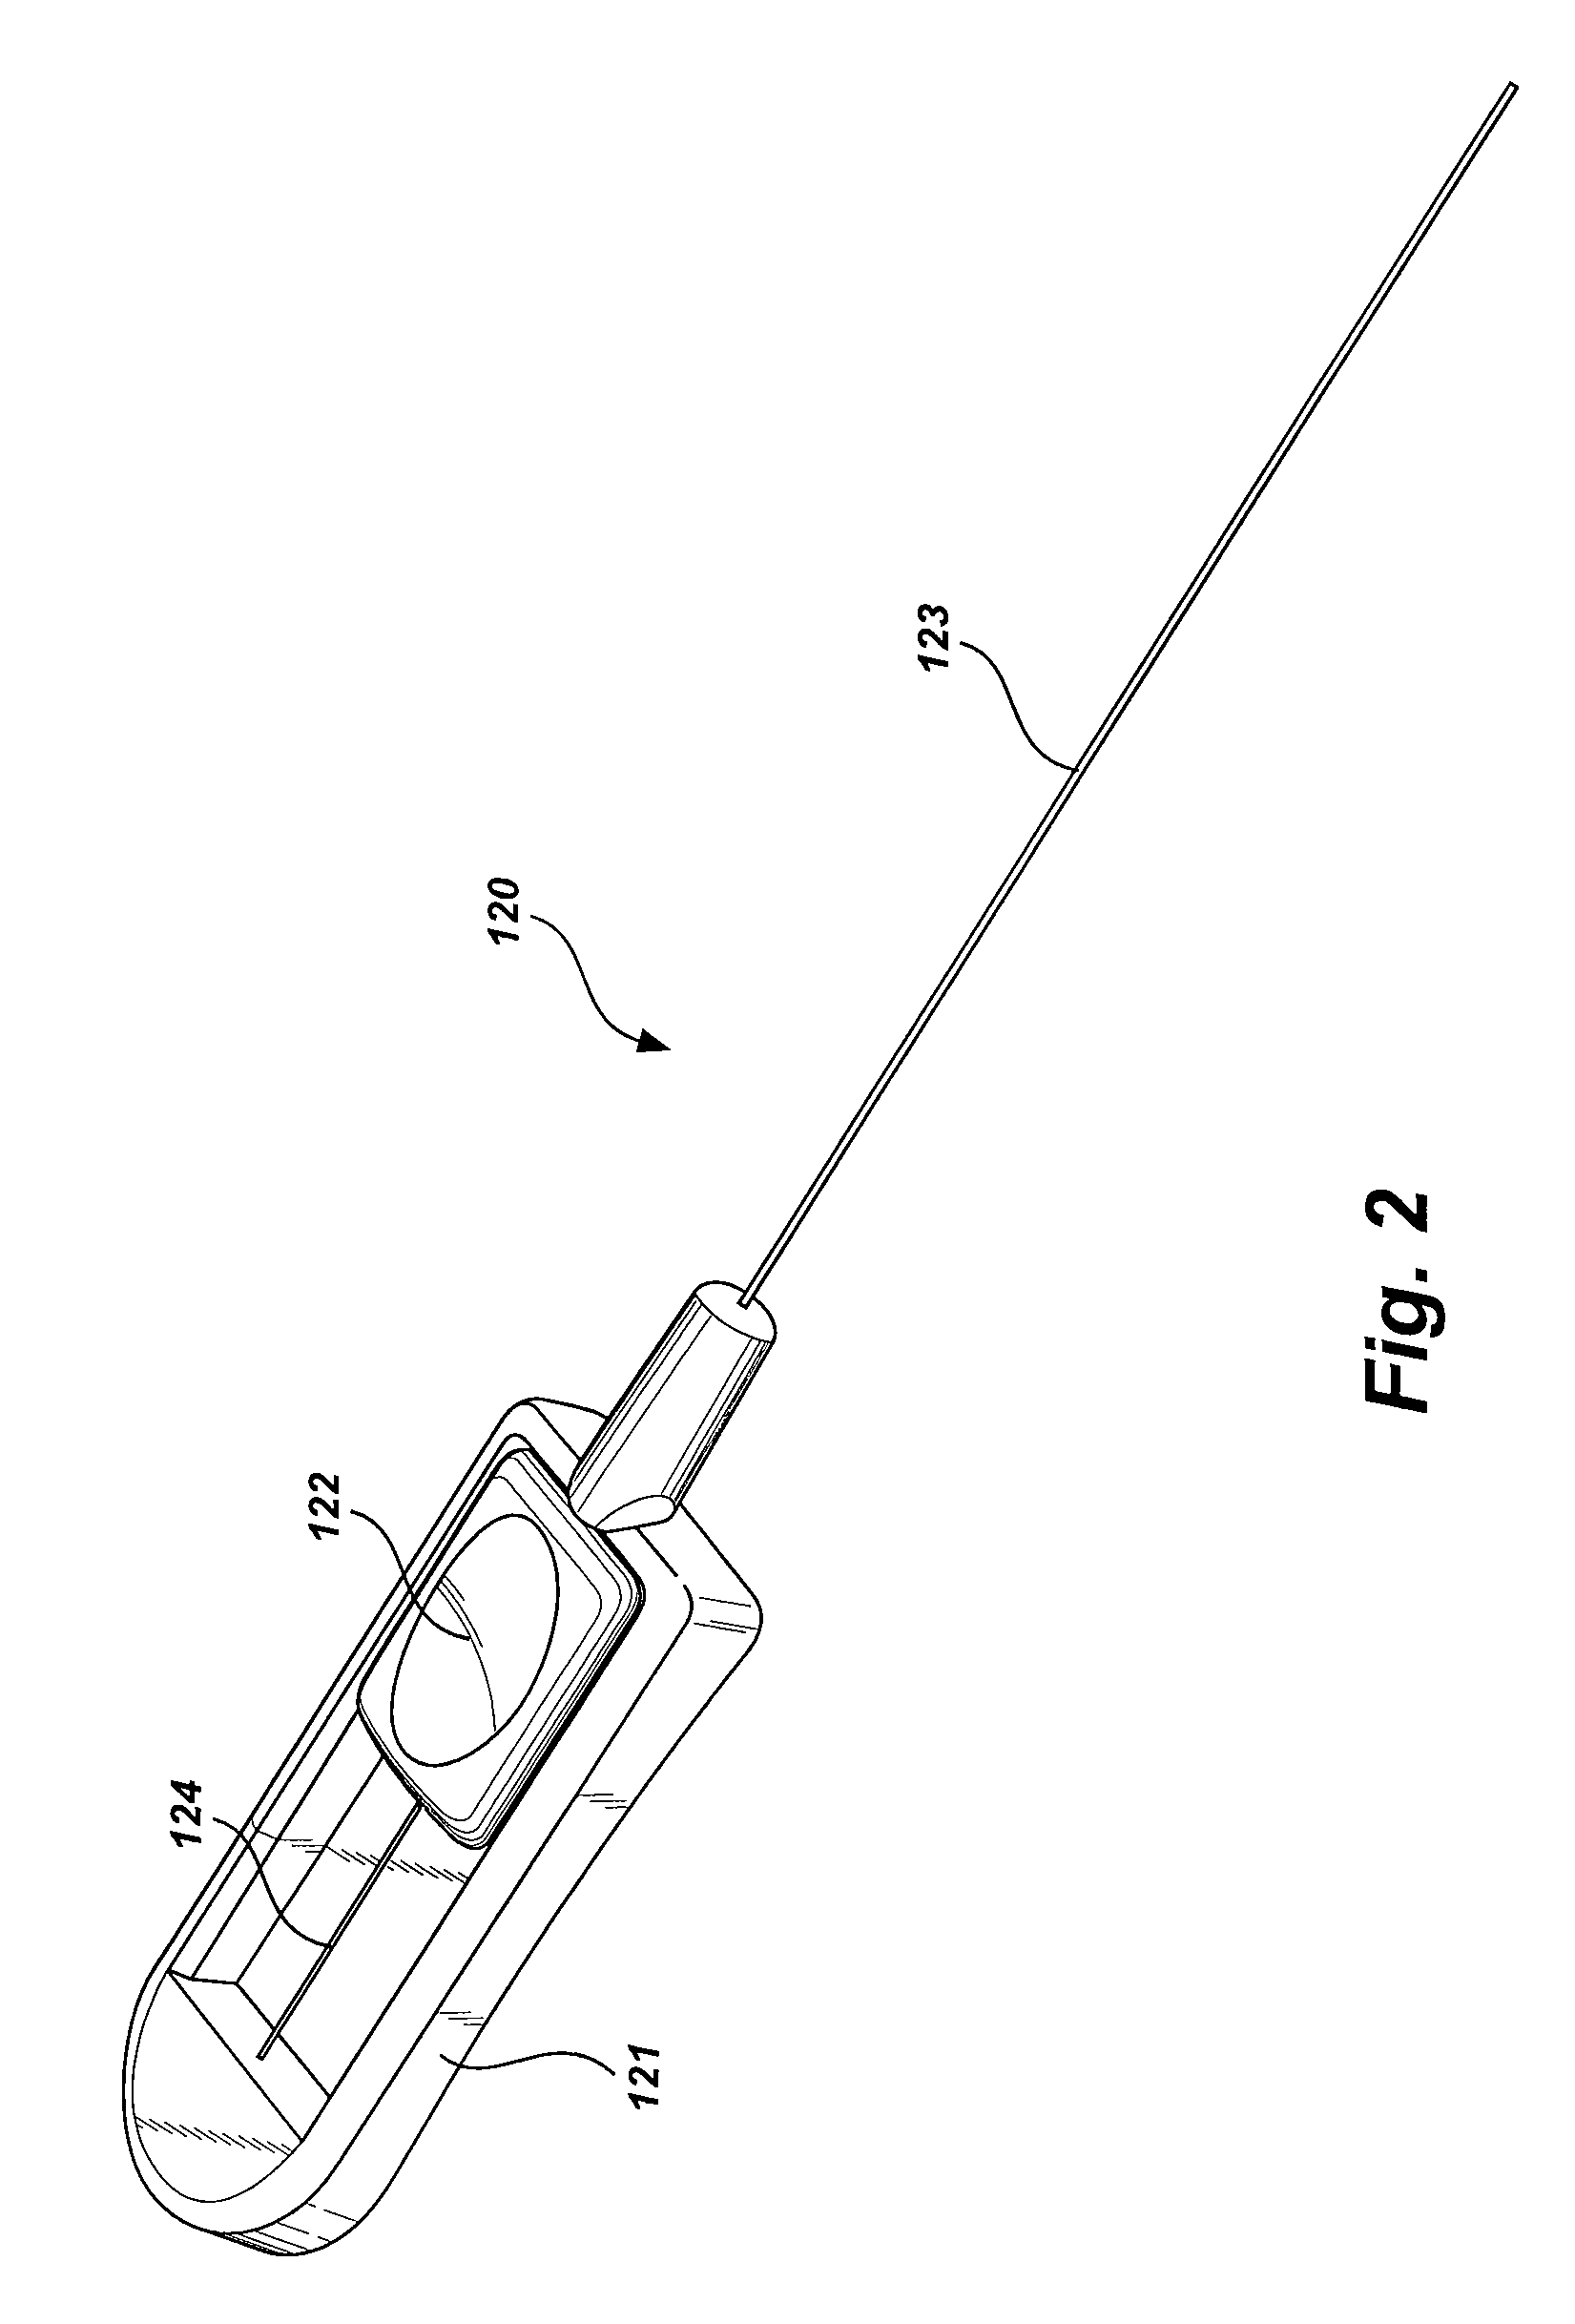 Steerable stylet handle assembly